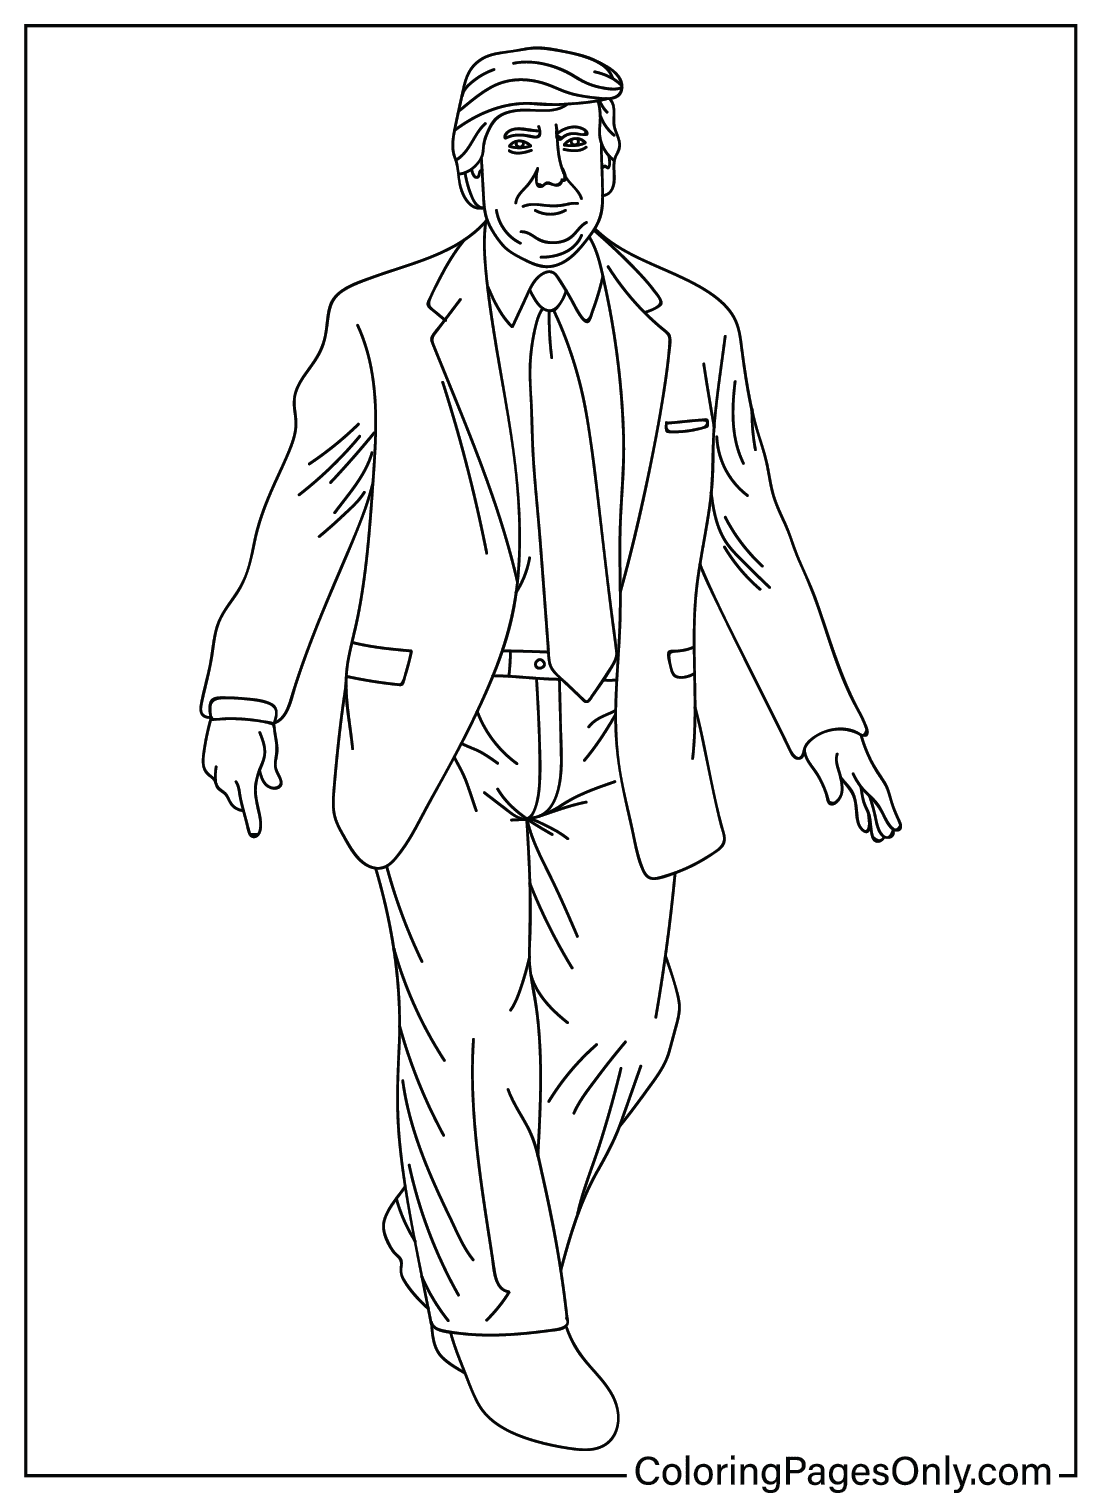 Donald Trump Coloring Pages to for Kids from Donald Trump